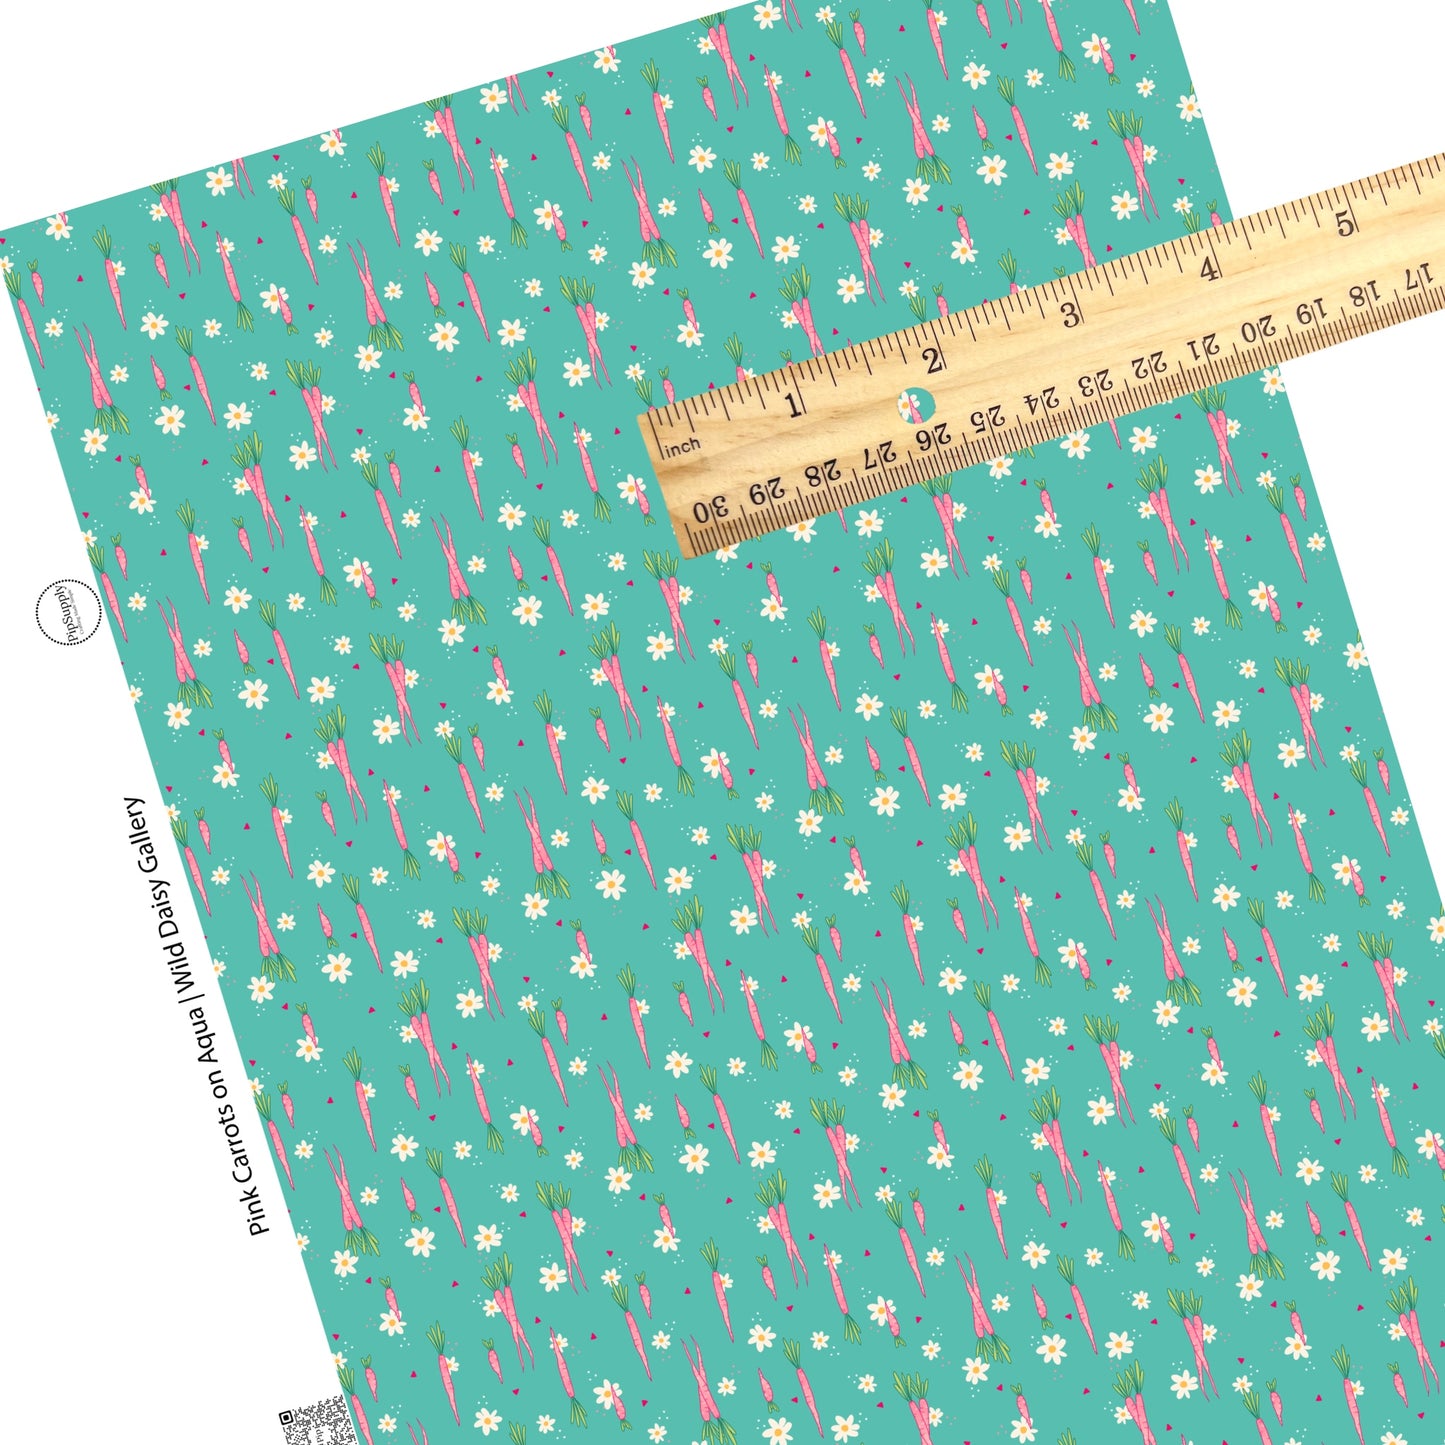 Pink long carrots with tiny cream flowers on aqua faux leather sheets